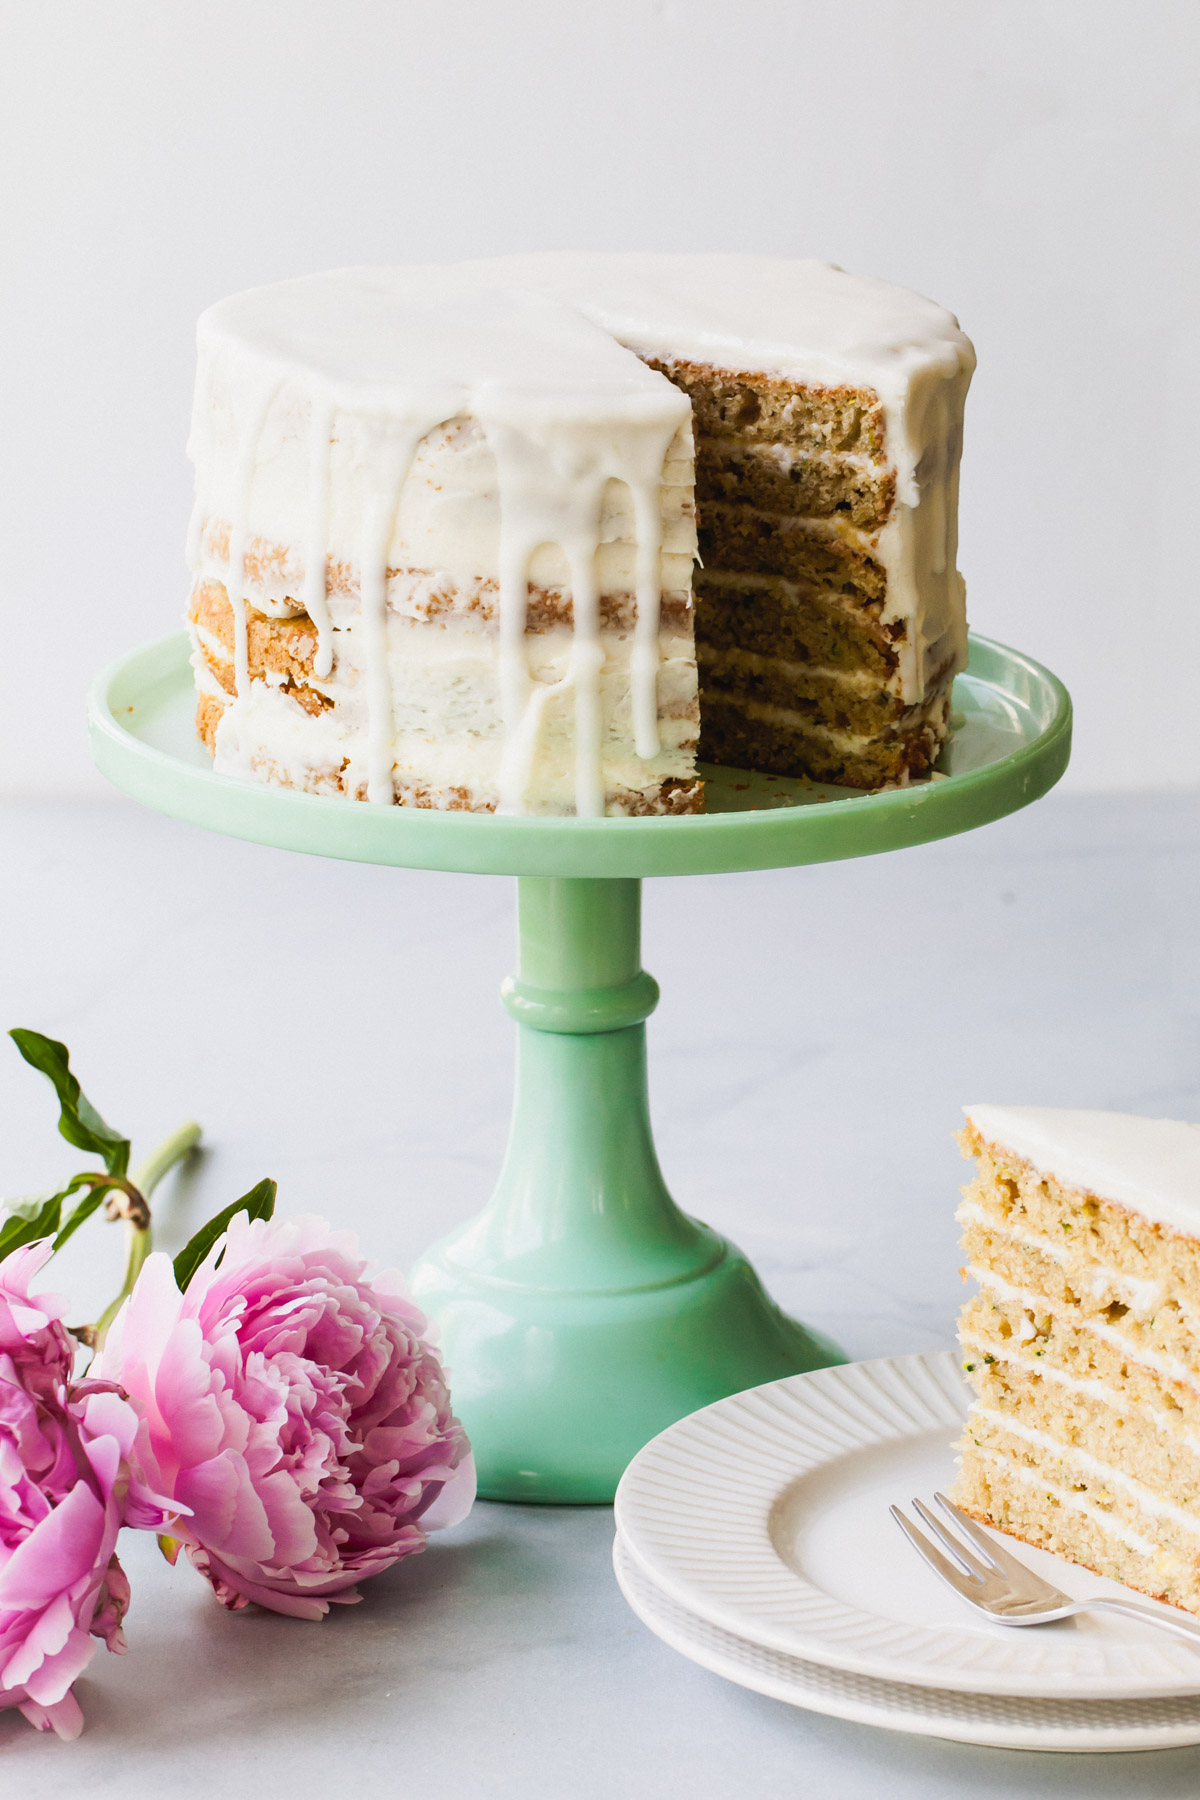 Lemon zucchini cake with goat cheese frosting on a green cake stand with a slice removed